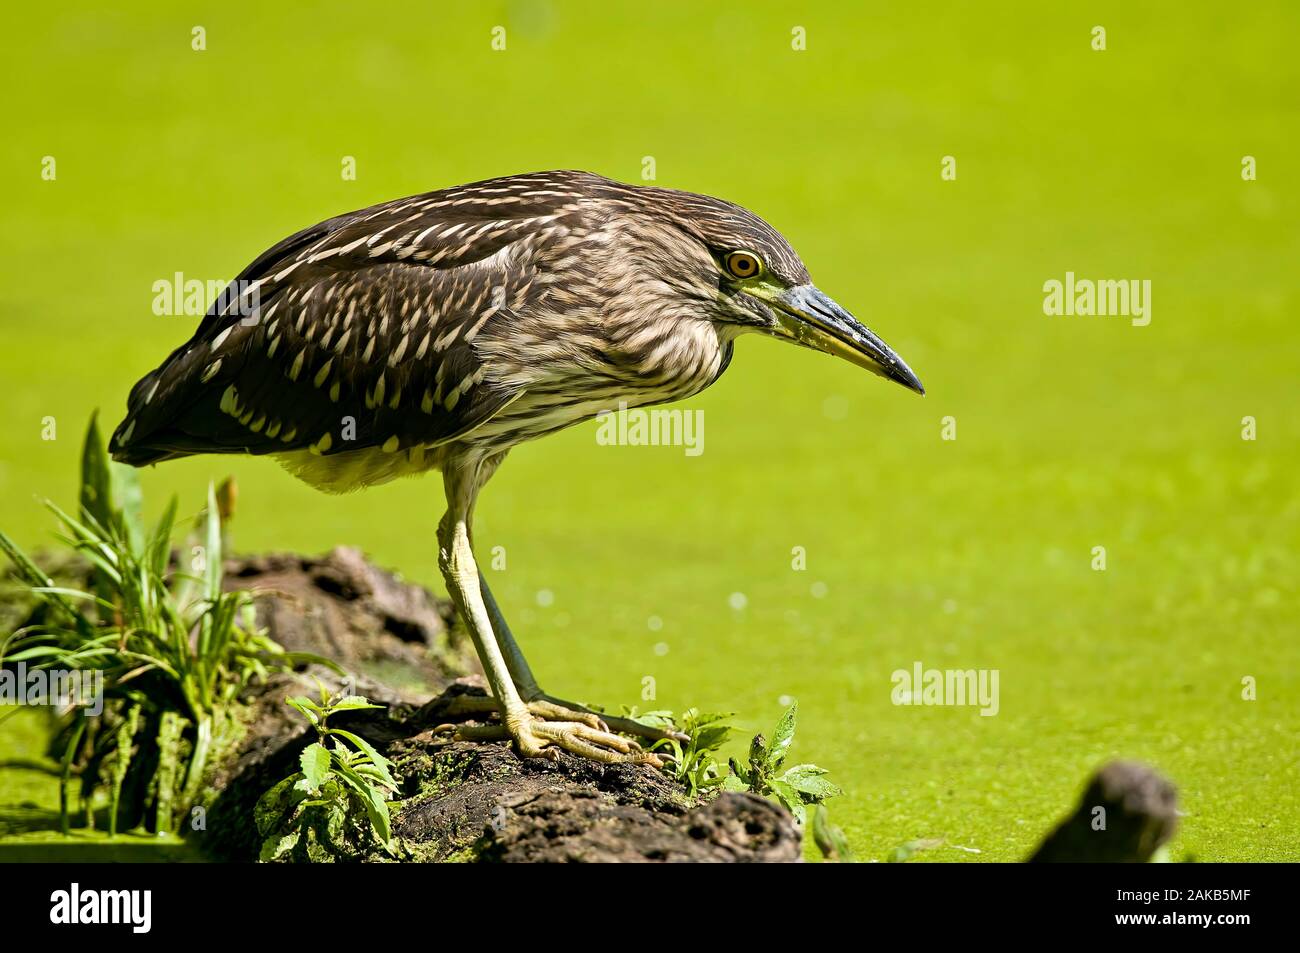 Black Crowned Night Heron Standing on Branch Stock Photo